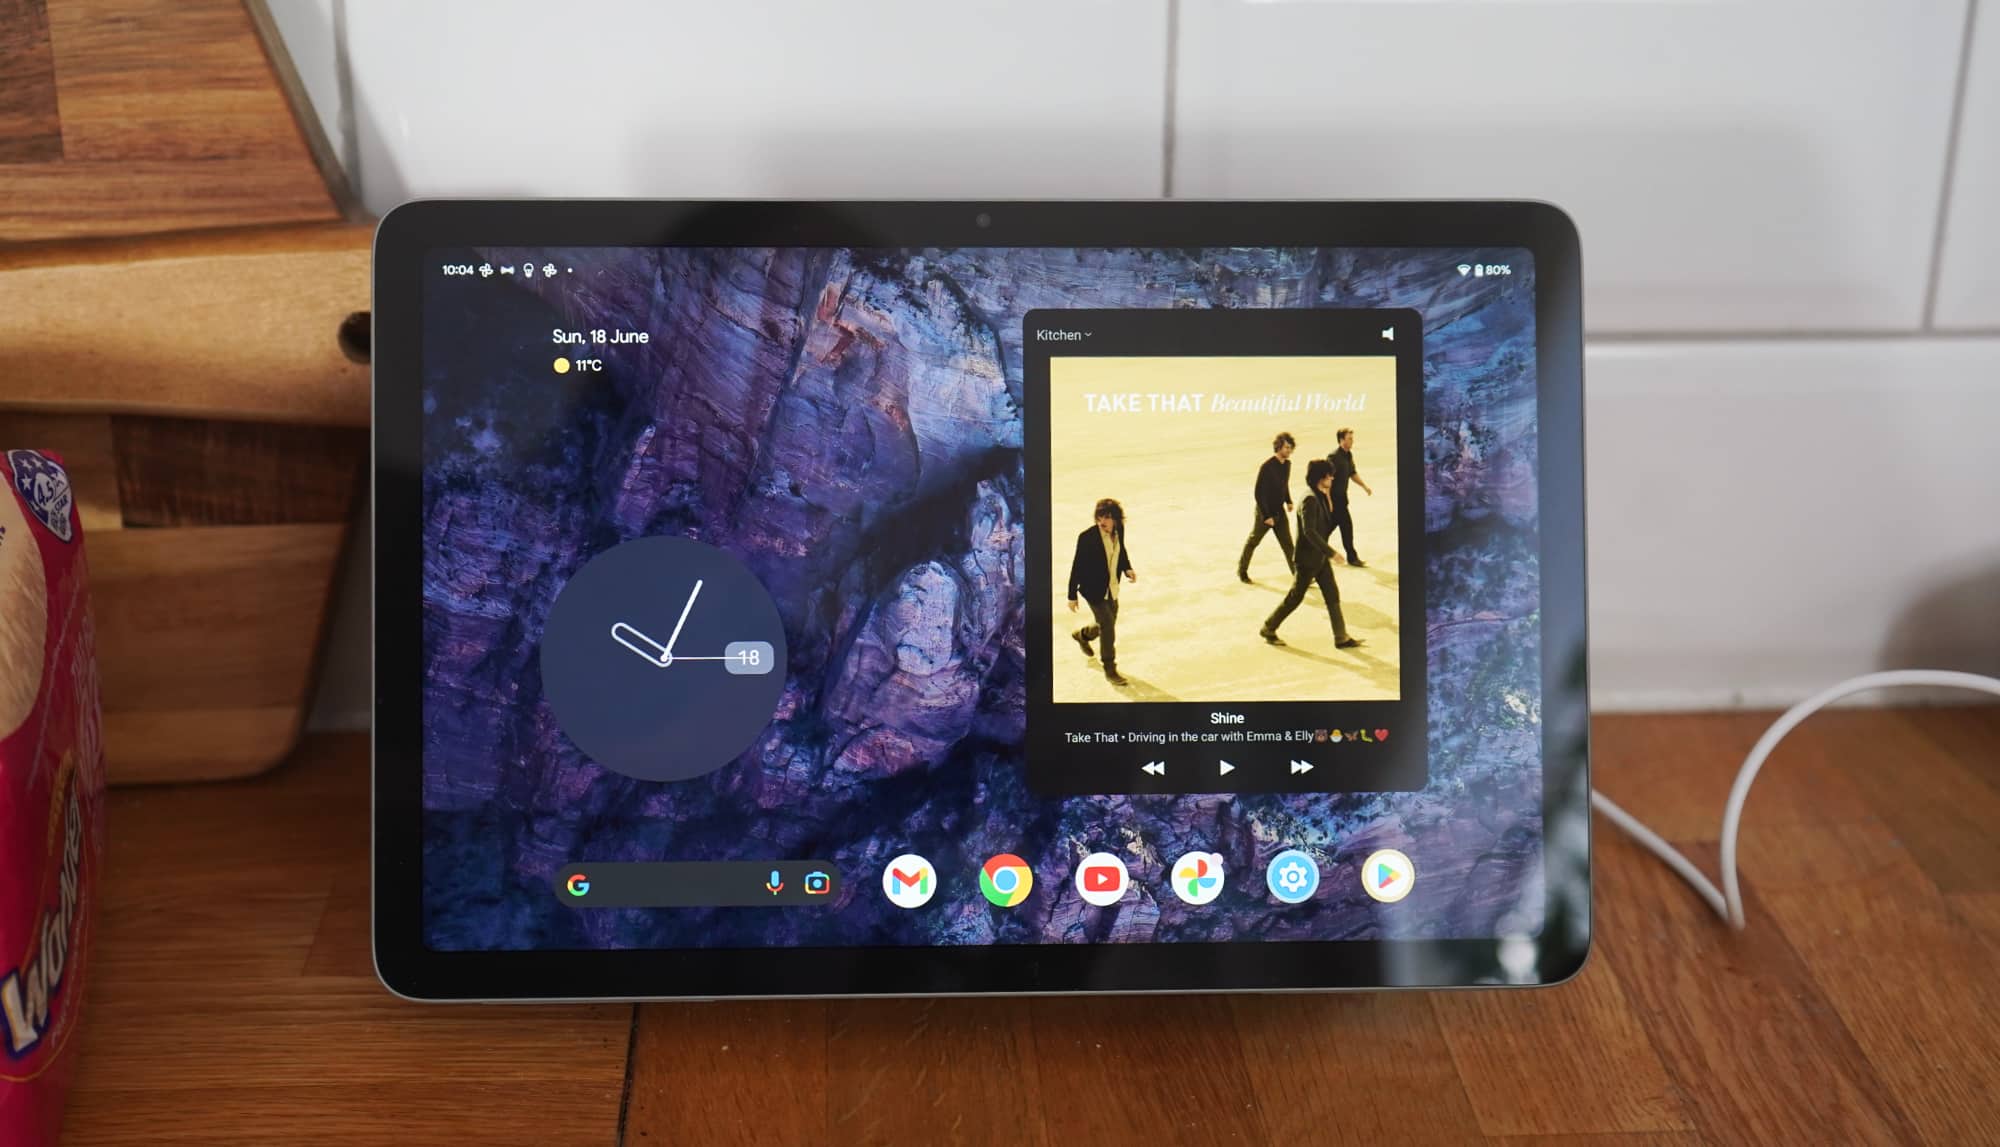 Google Pixel Tablet review: The dock changes the game